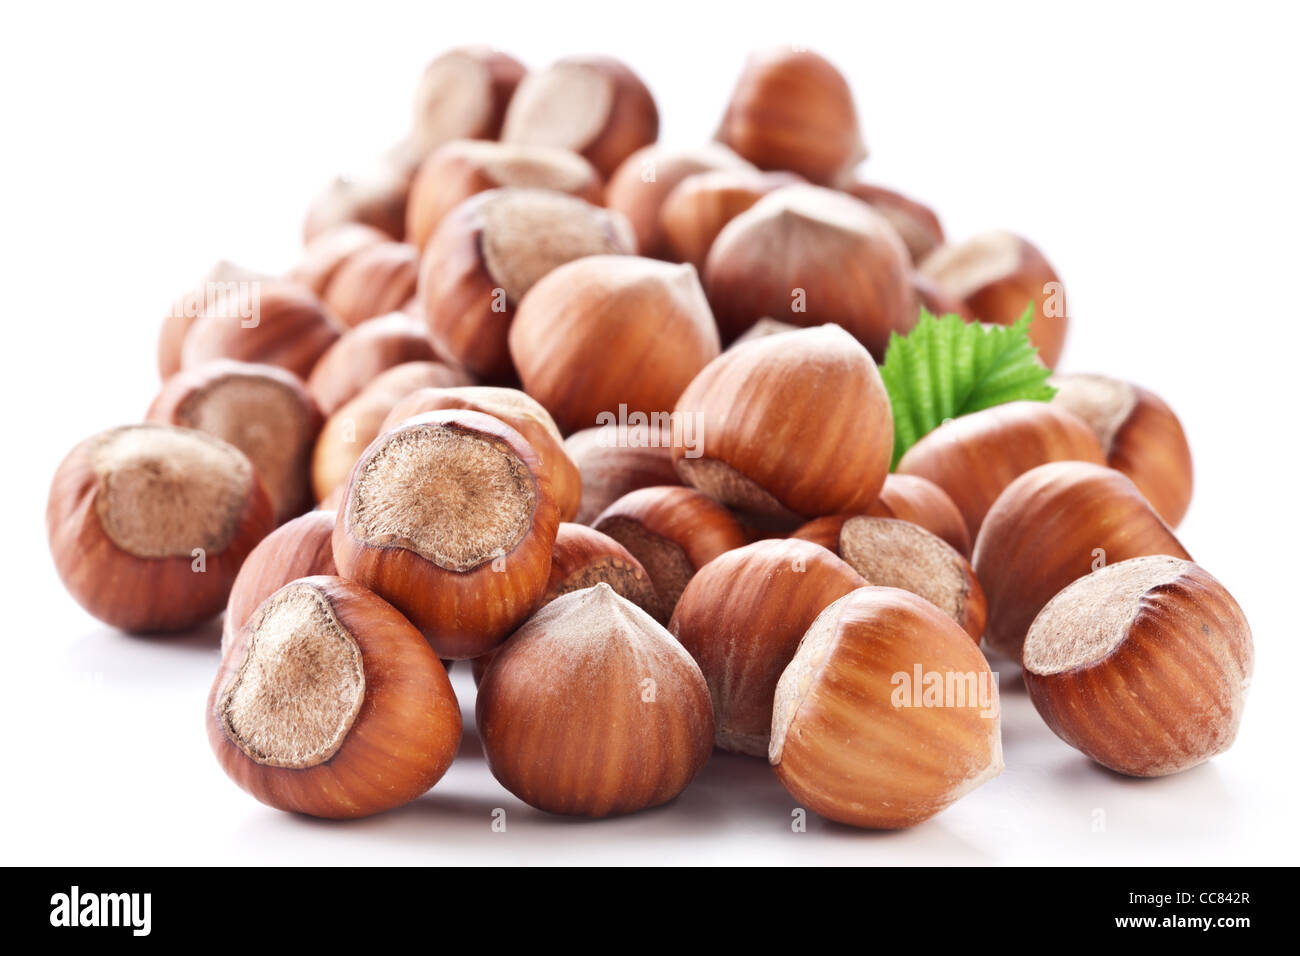 Nuts filberts isolated on white background. Stock Photo